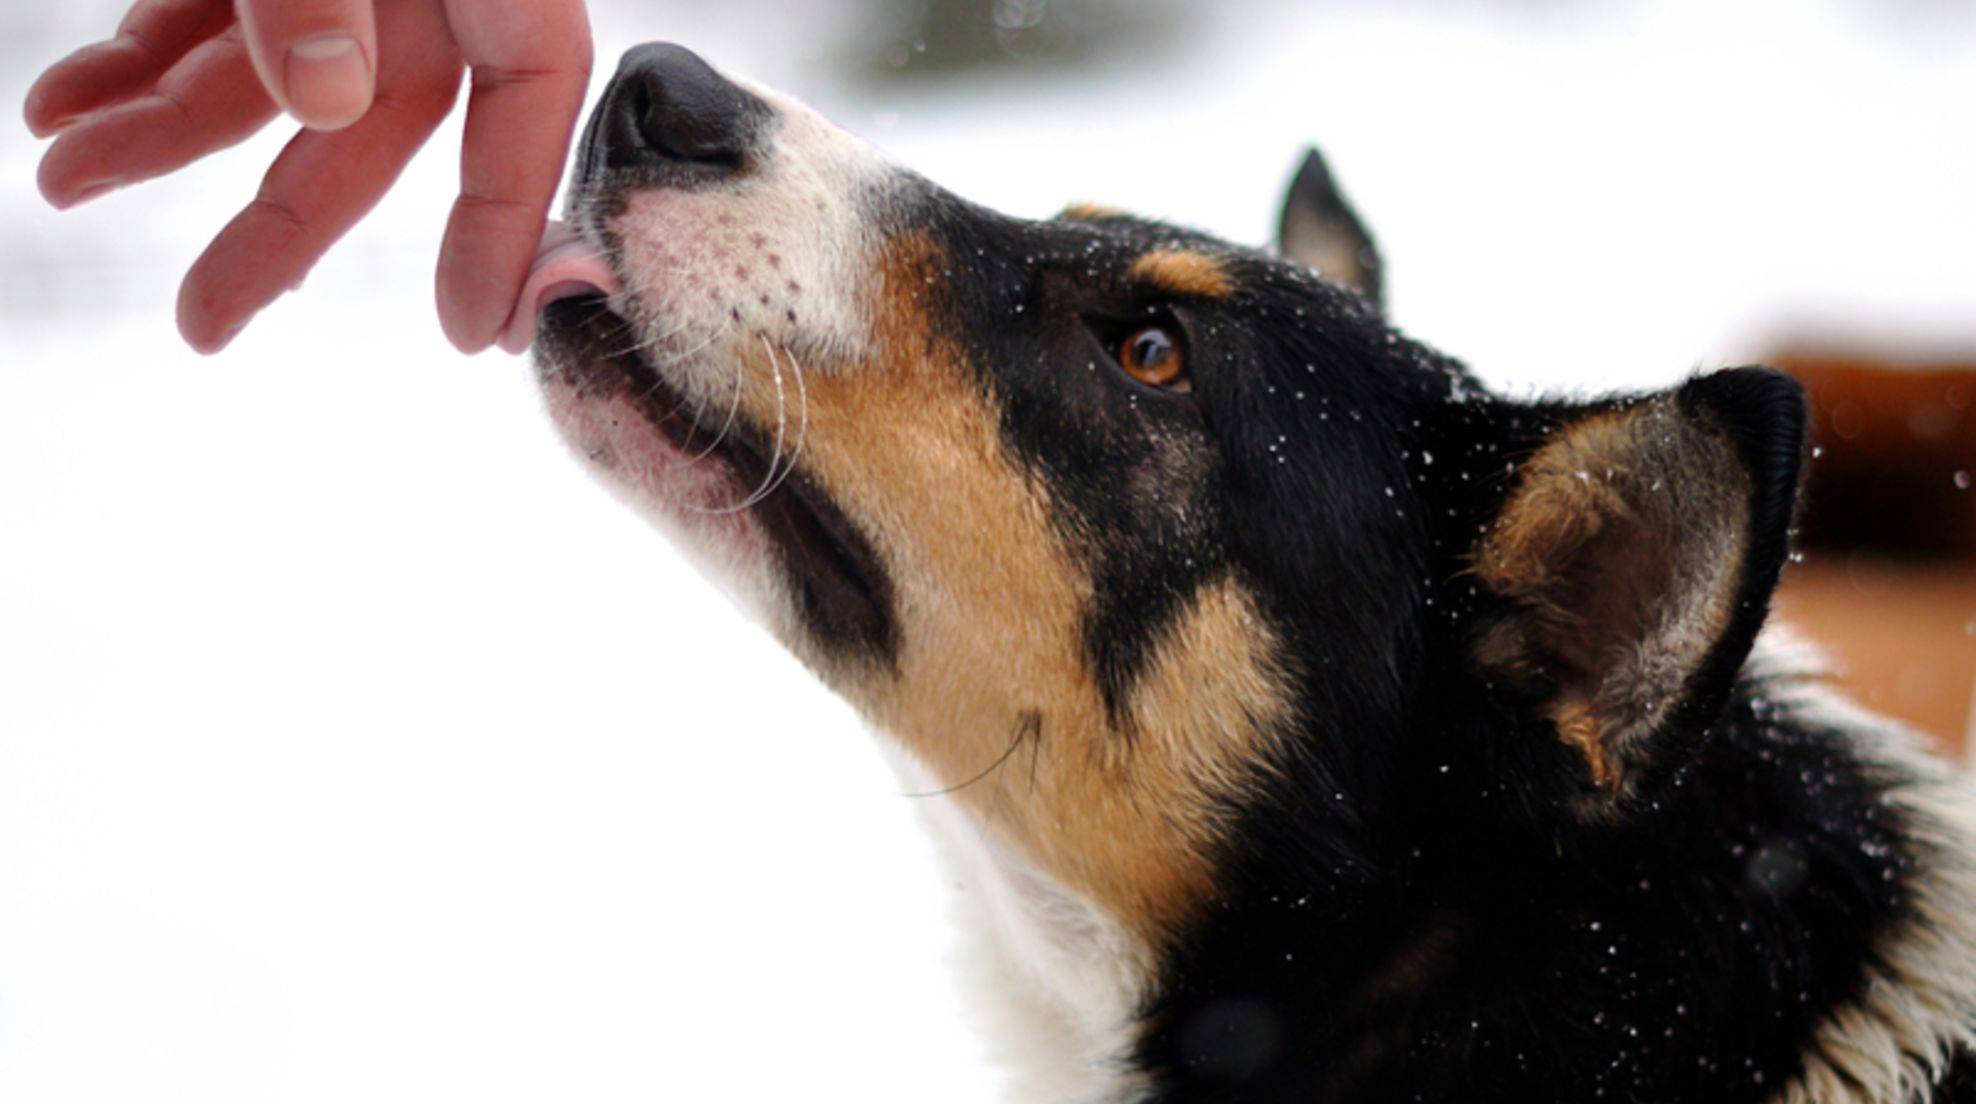 Why do dogs lick people? Meaning of "dog kisses